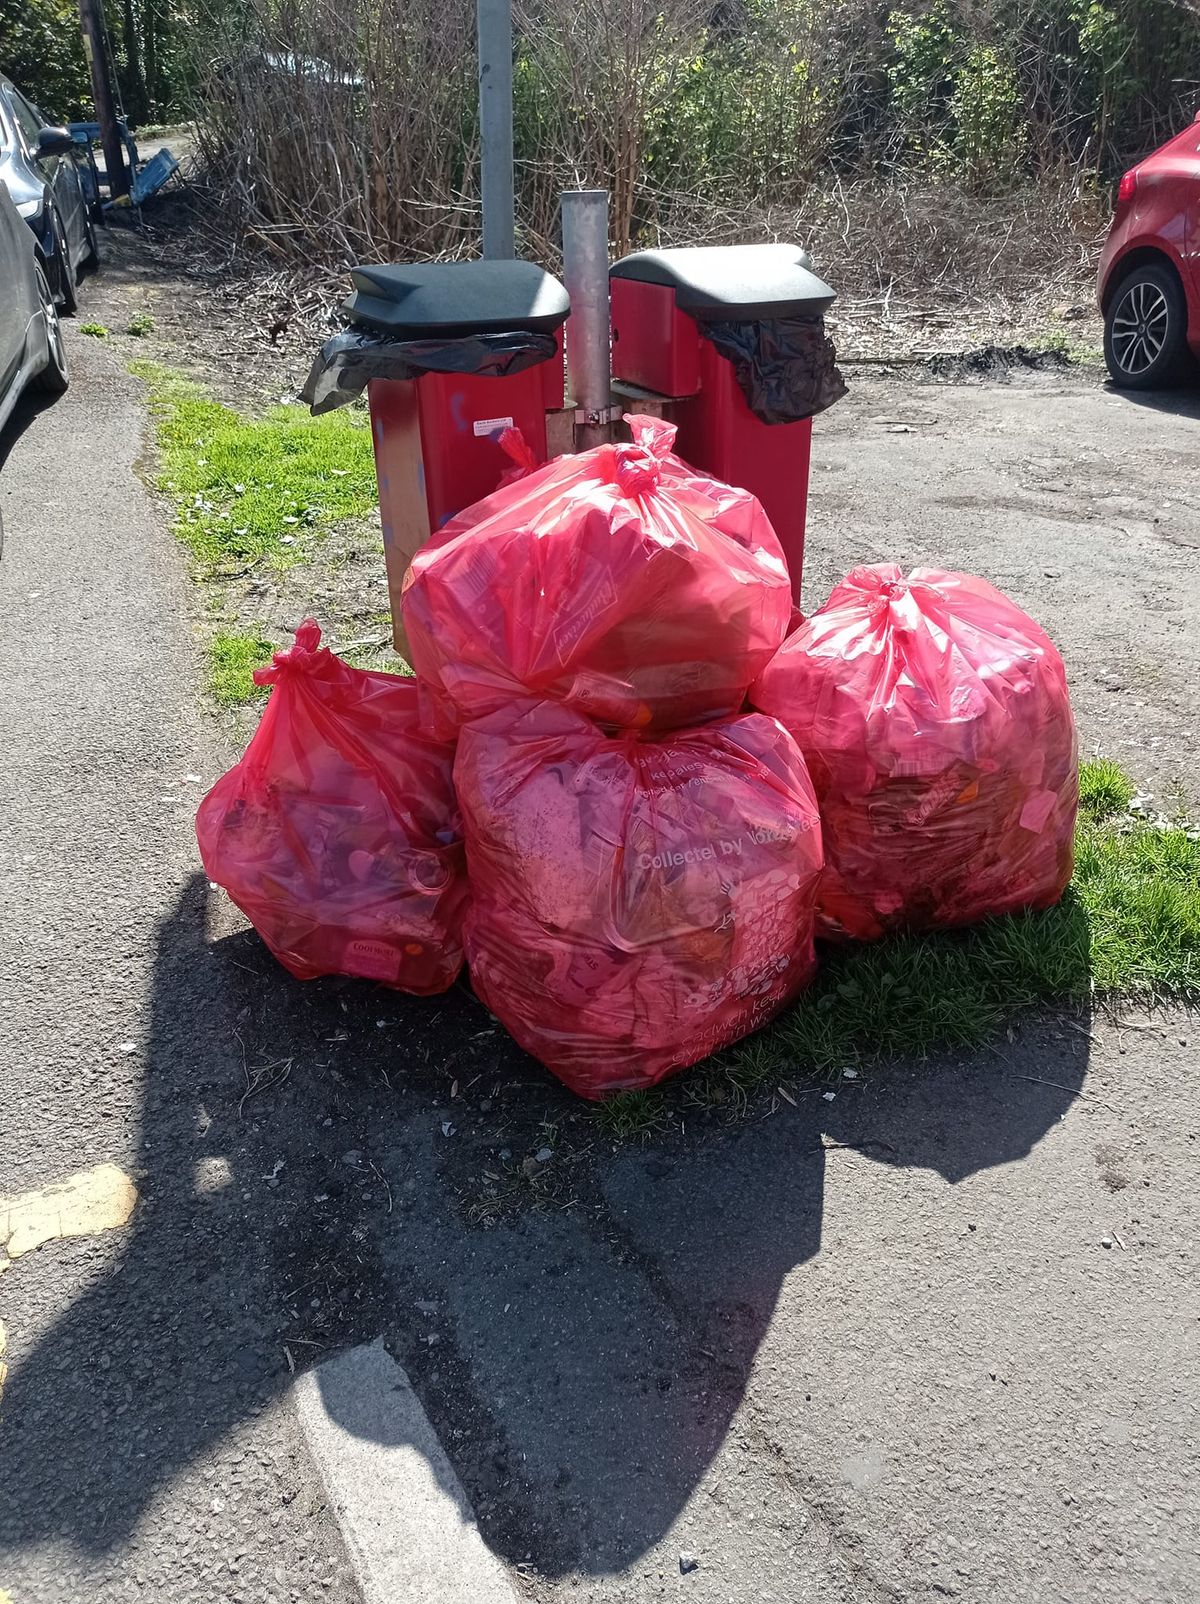 BnG monthly litterpick July